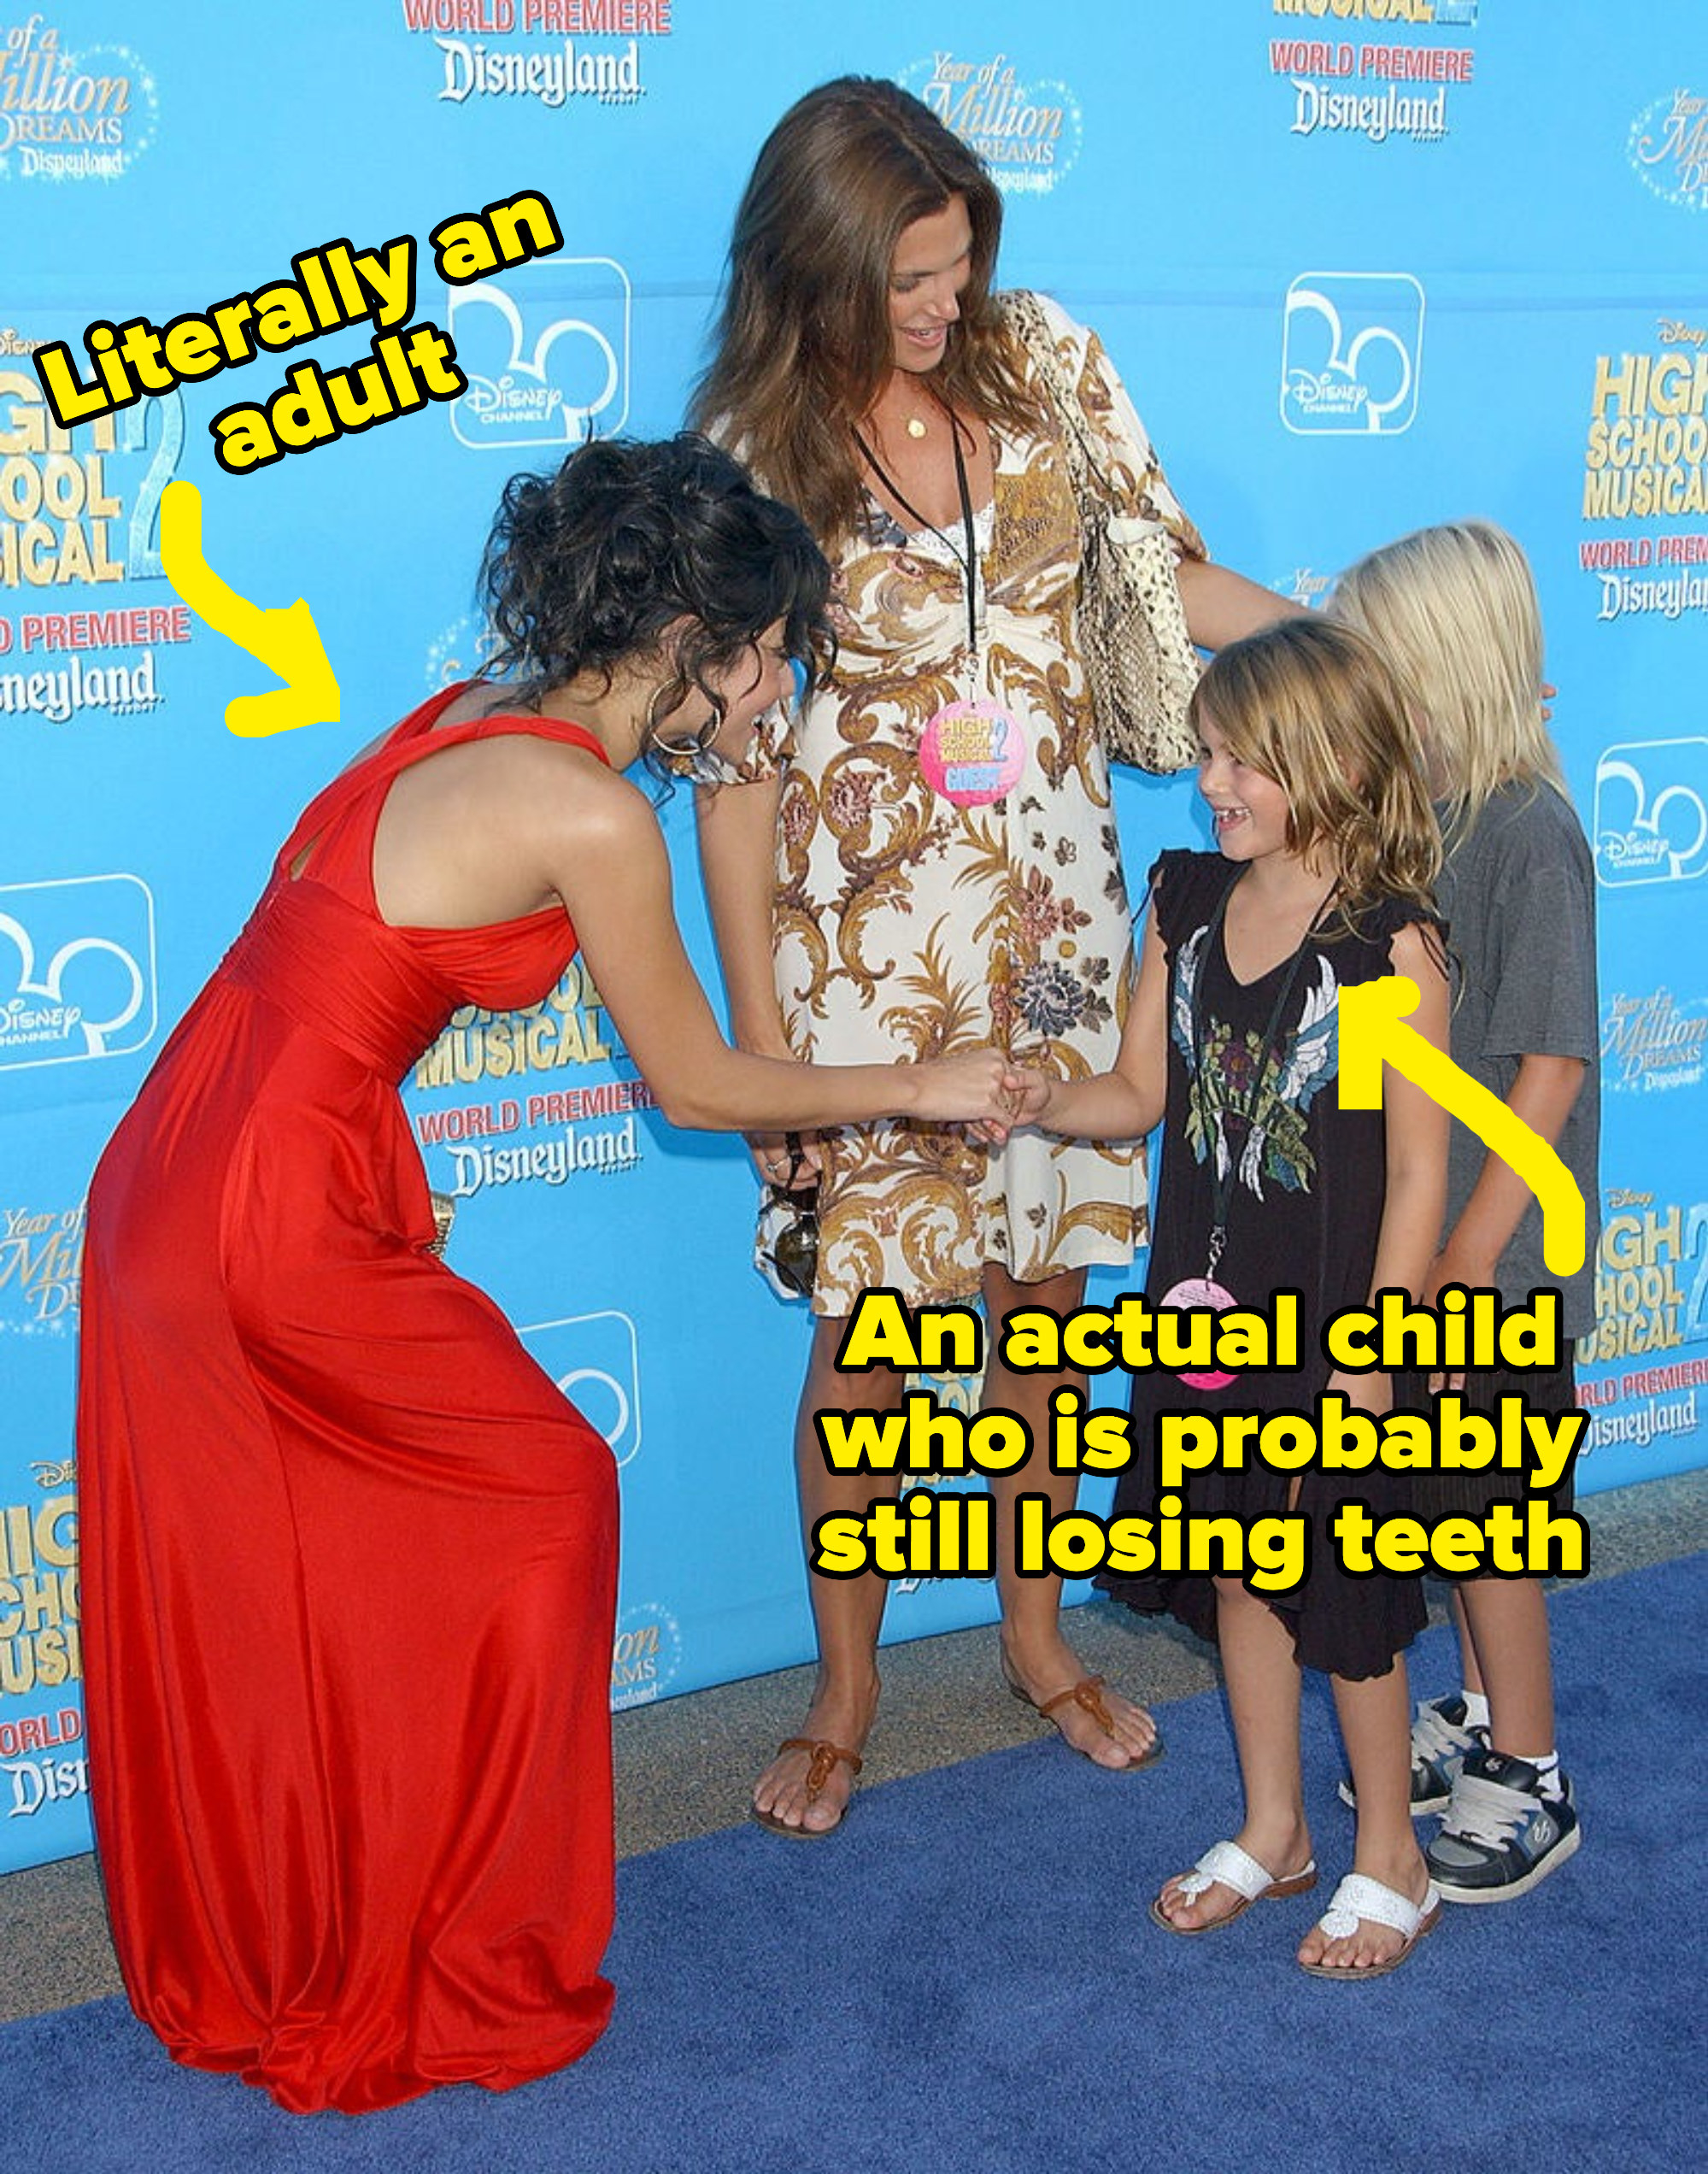 The same photo of them with captions for Vanessa — &quot;Literally an adult&quot; — and Kaia: &quot;An actual child who is probably still losing teeth&quot;